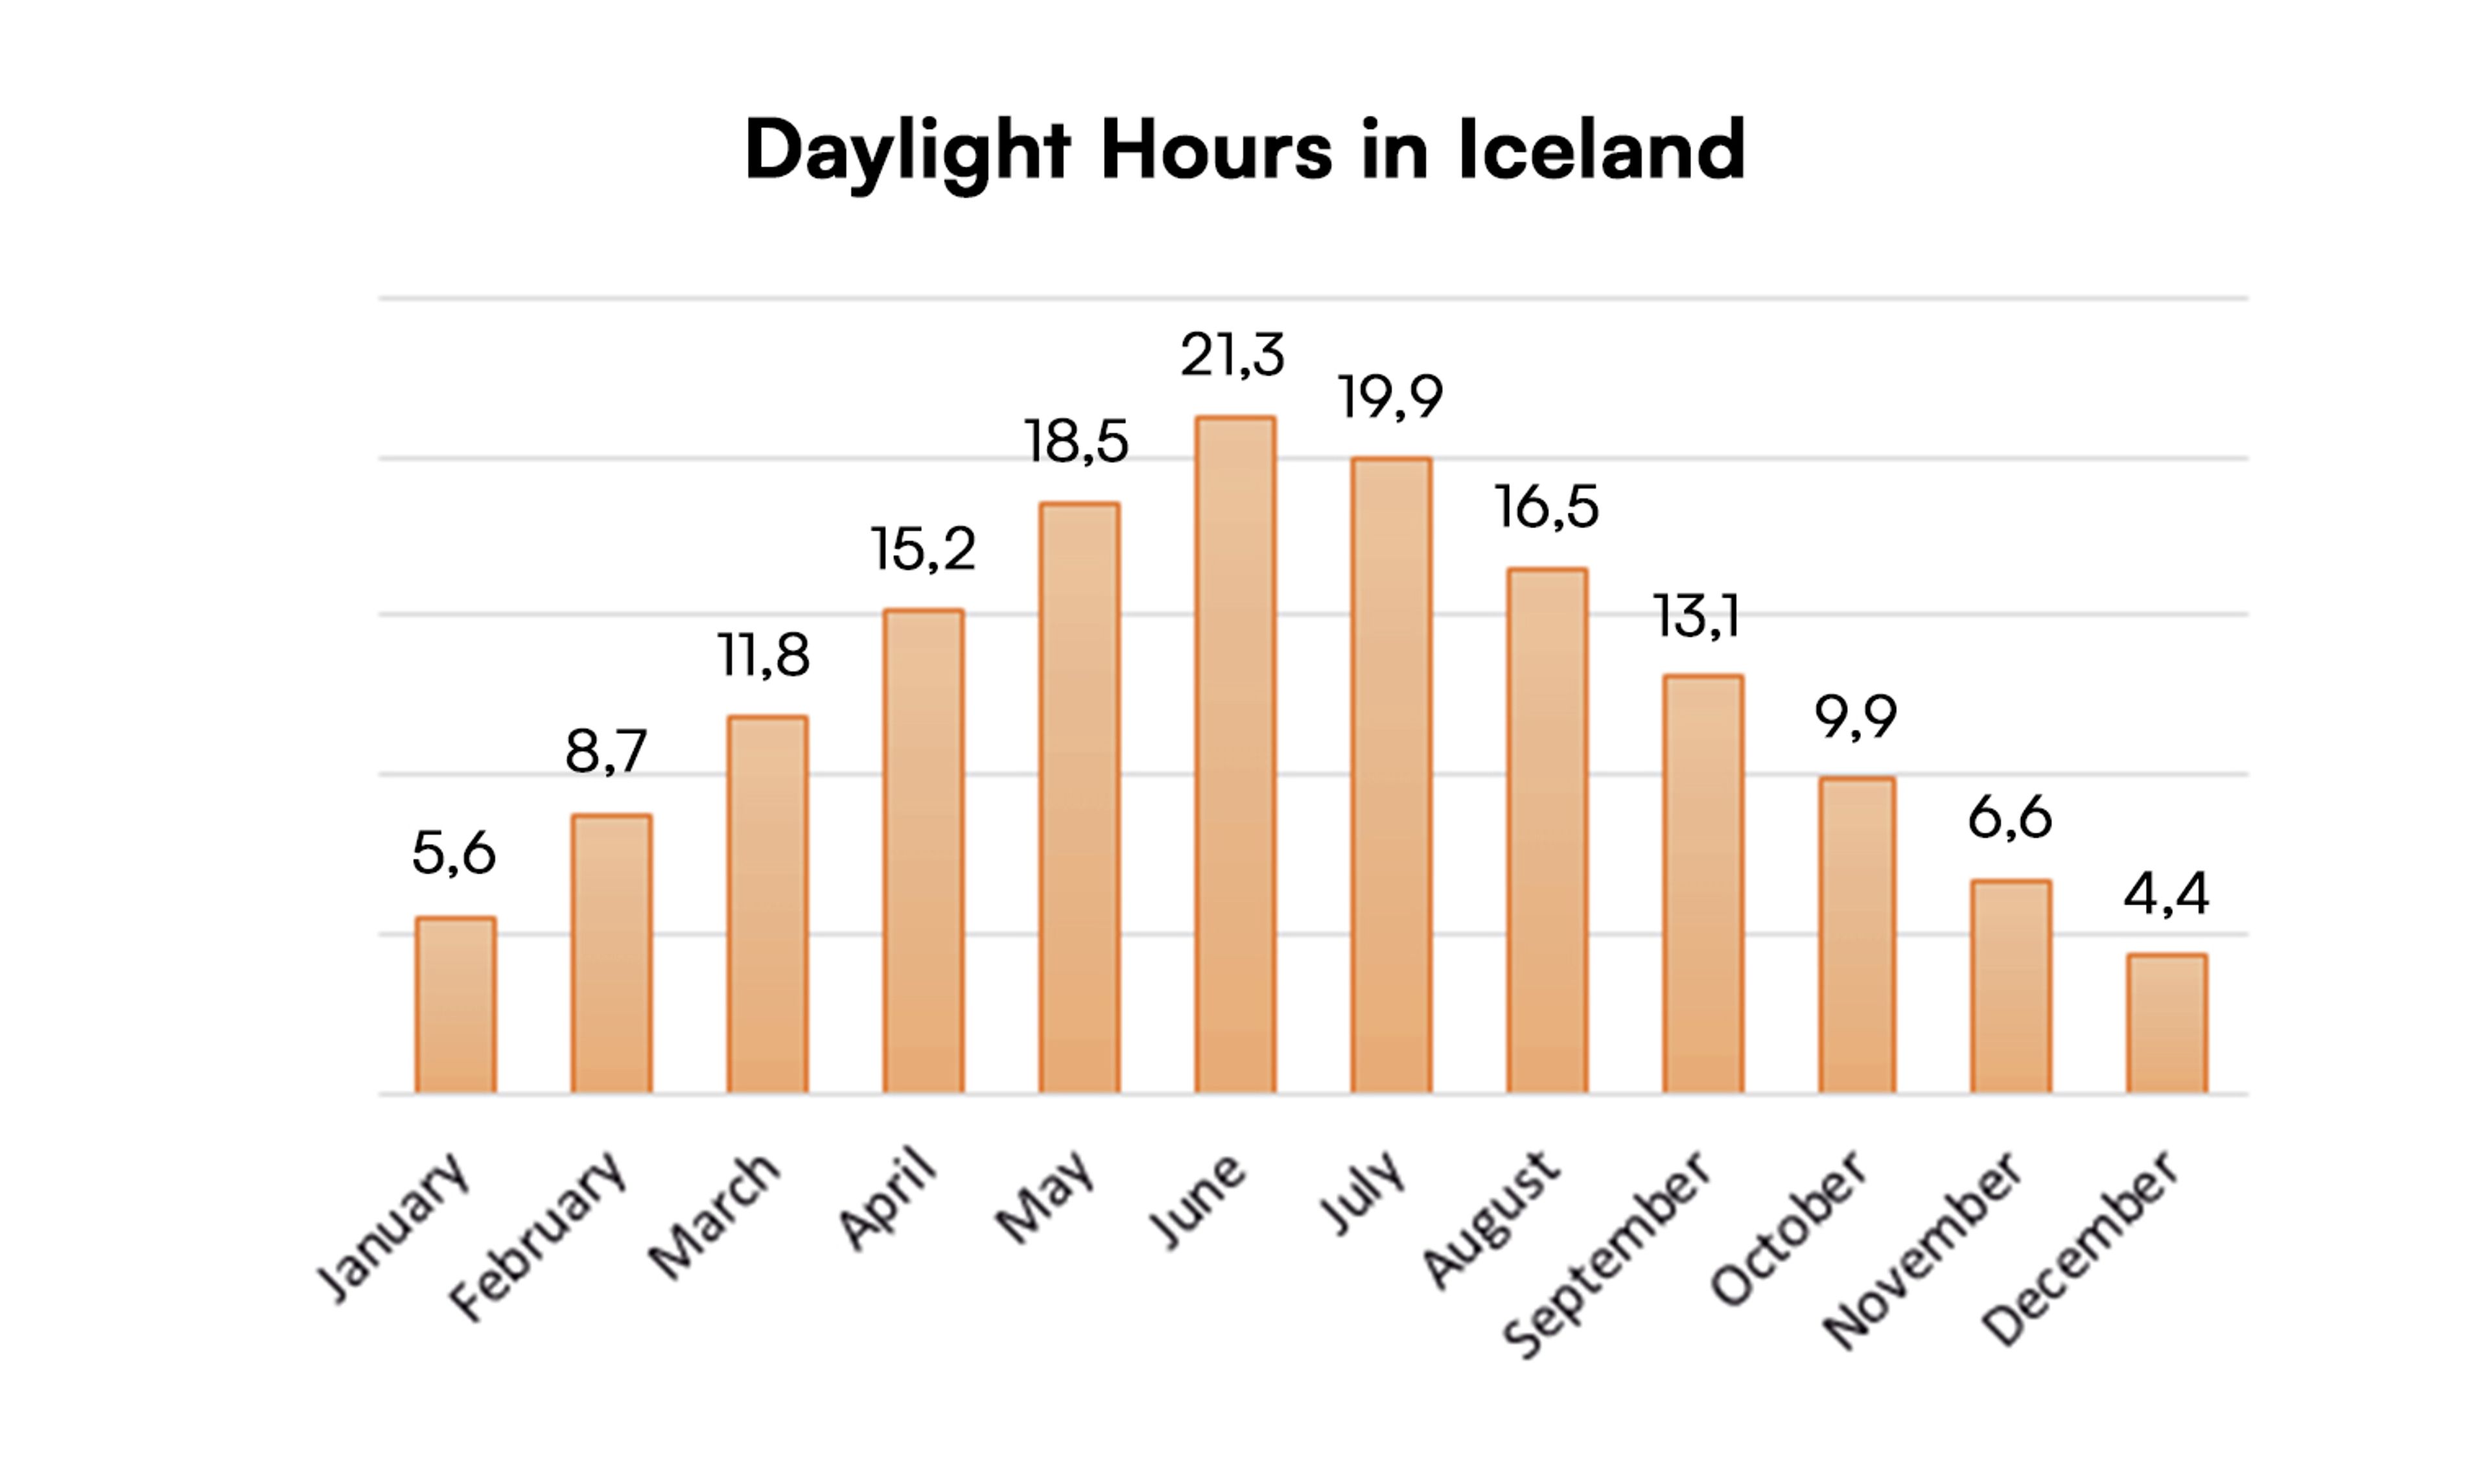 Average Daylight Hours in Iceland in June during the summer season